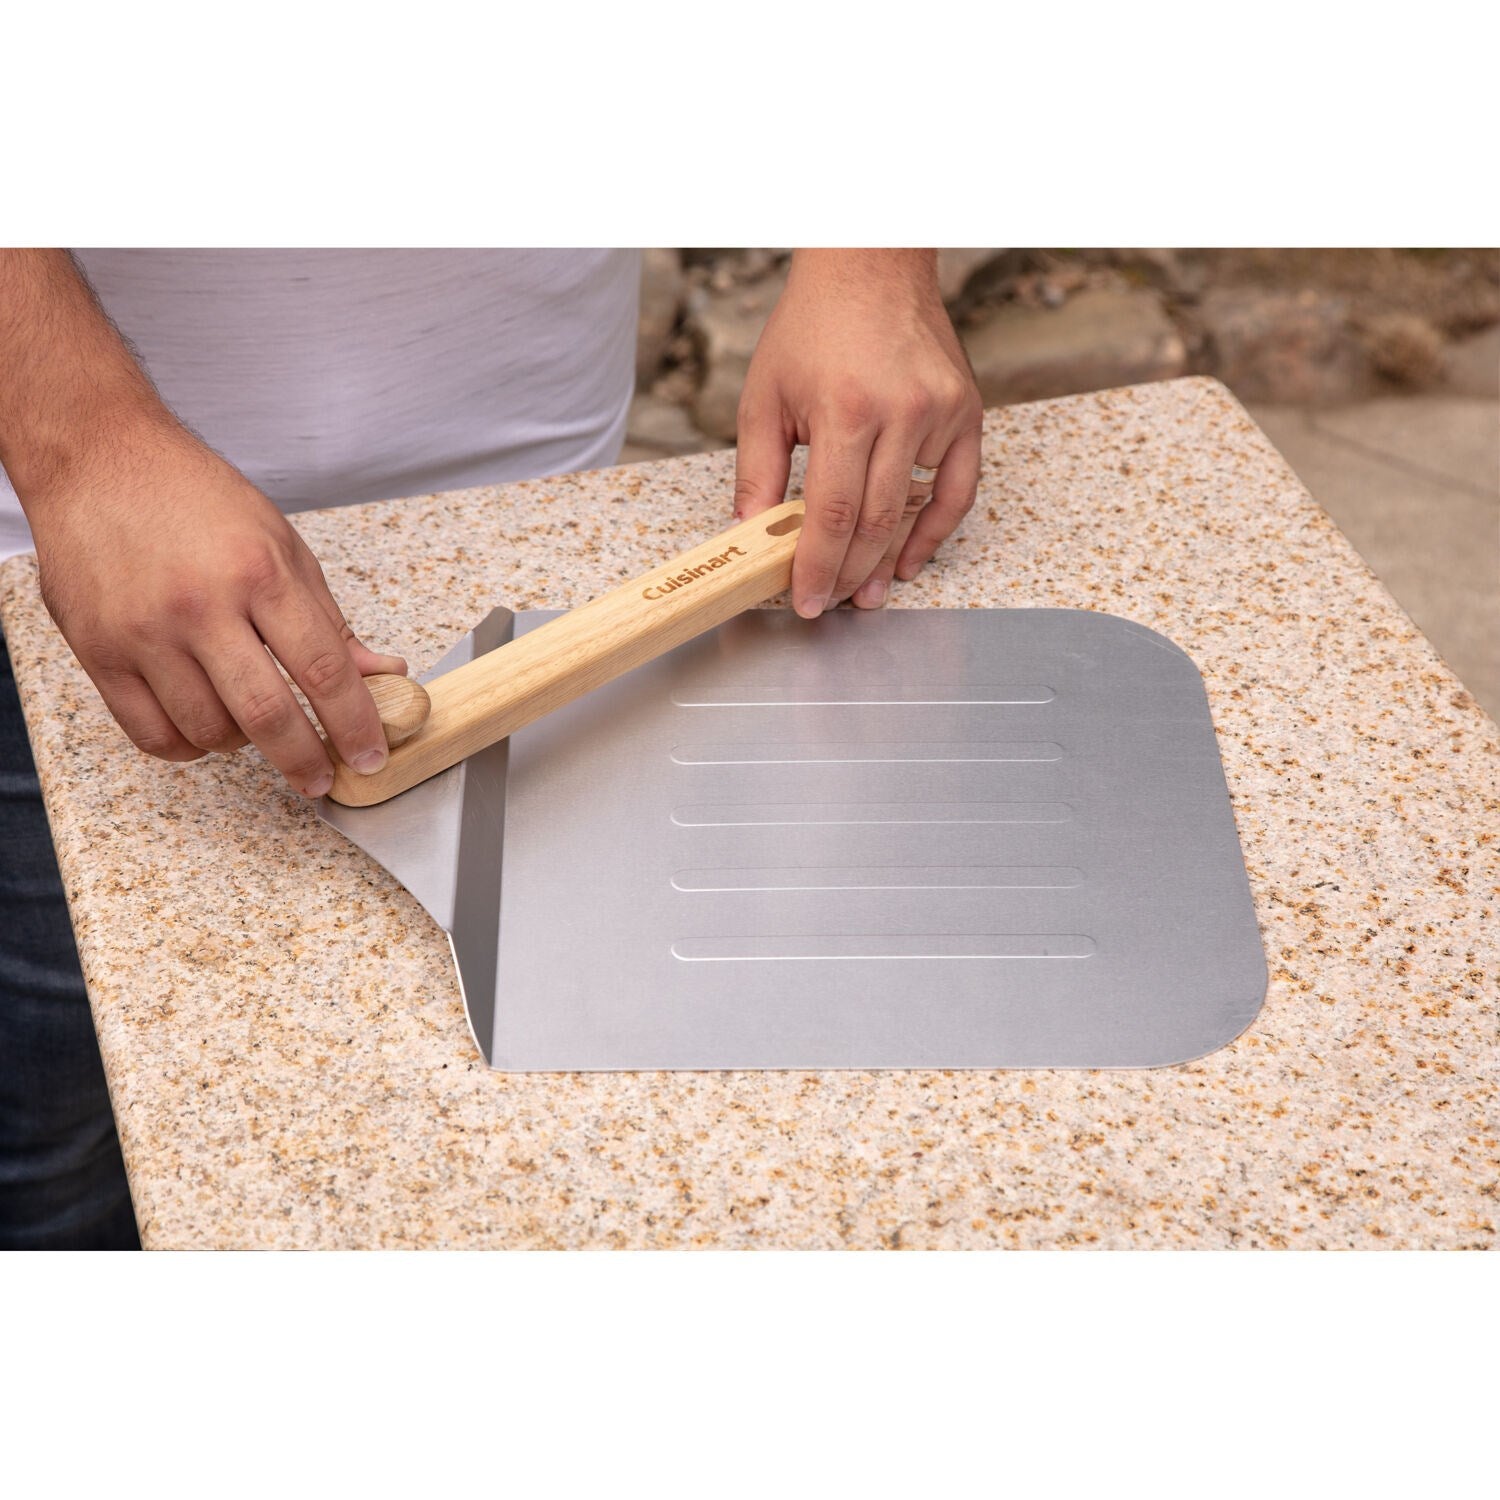 Cuisinart Grill - 12" Pizza Peel with Folding Wooden Handle - CPP-612